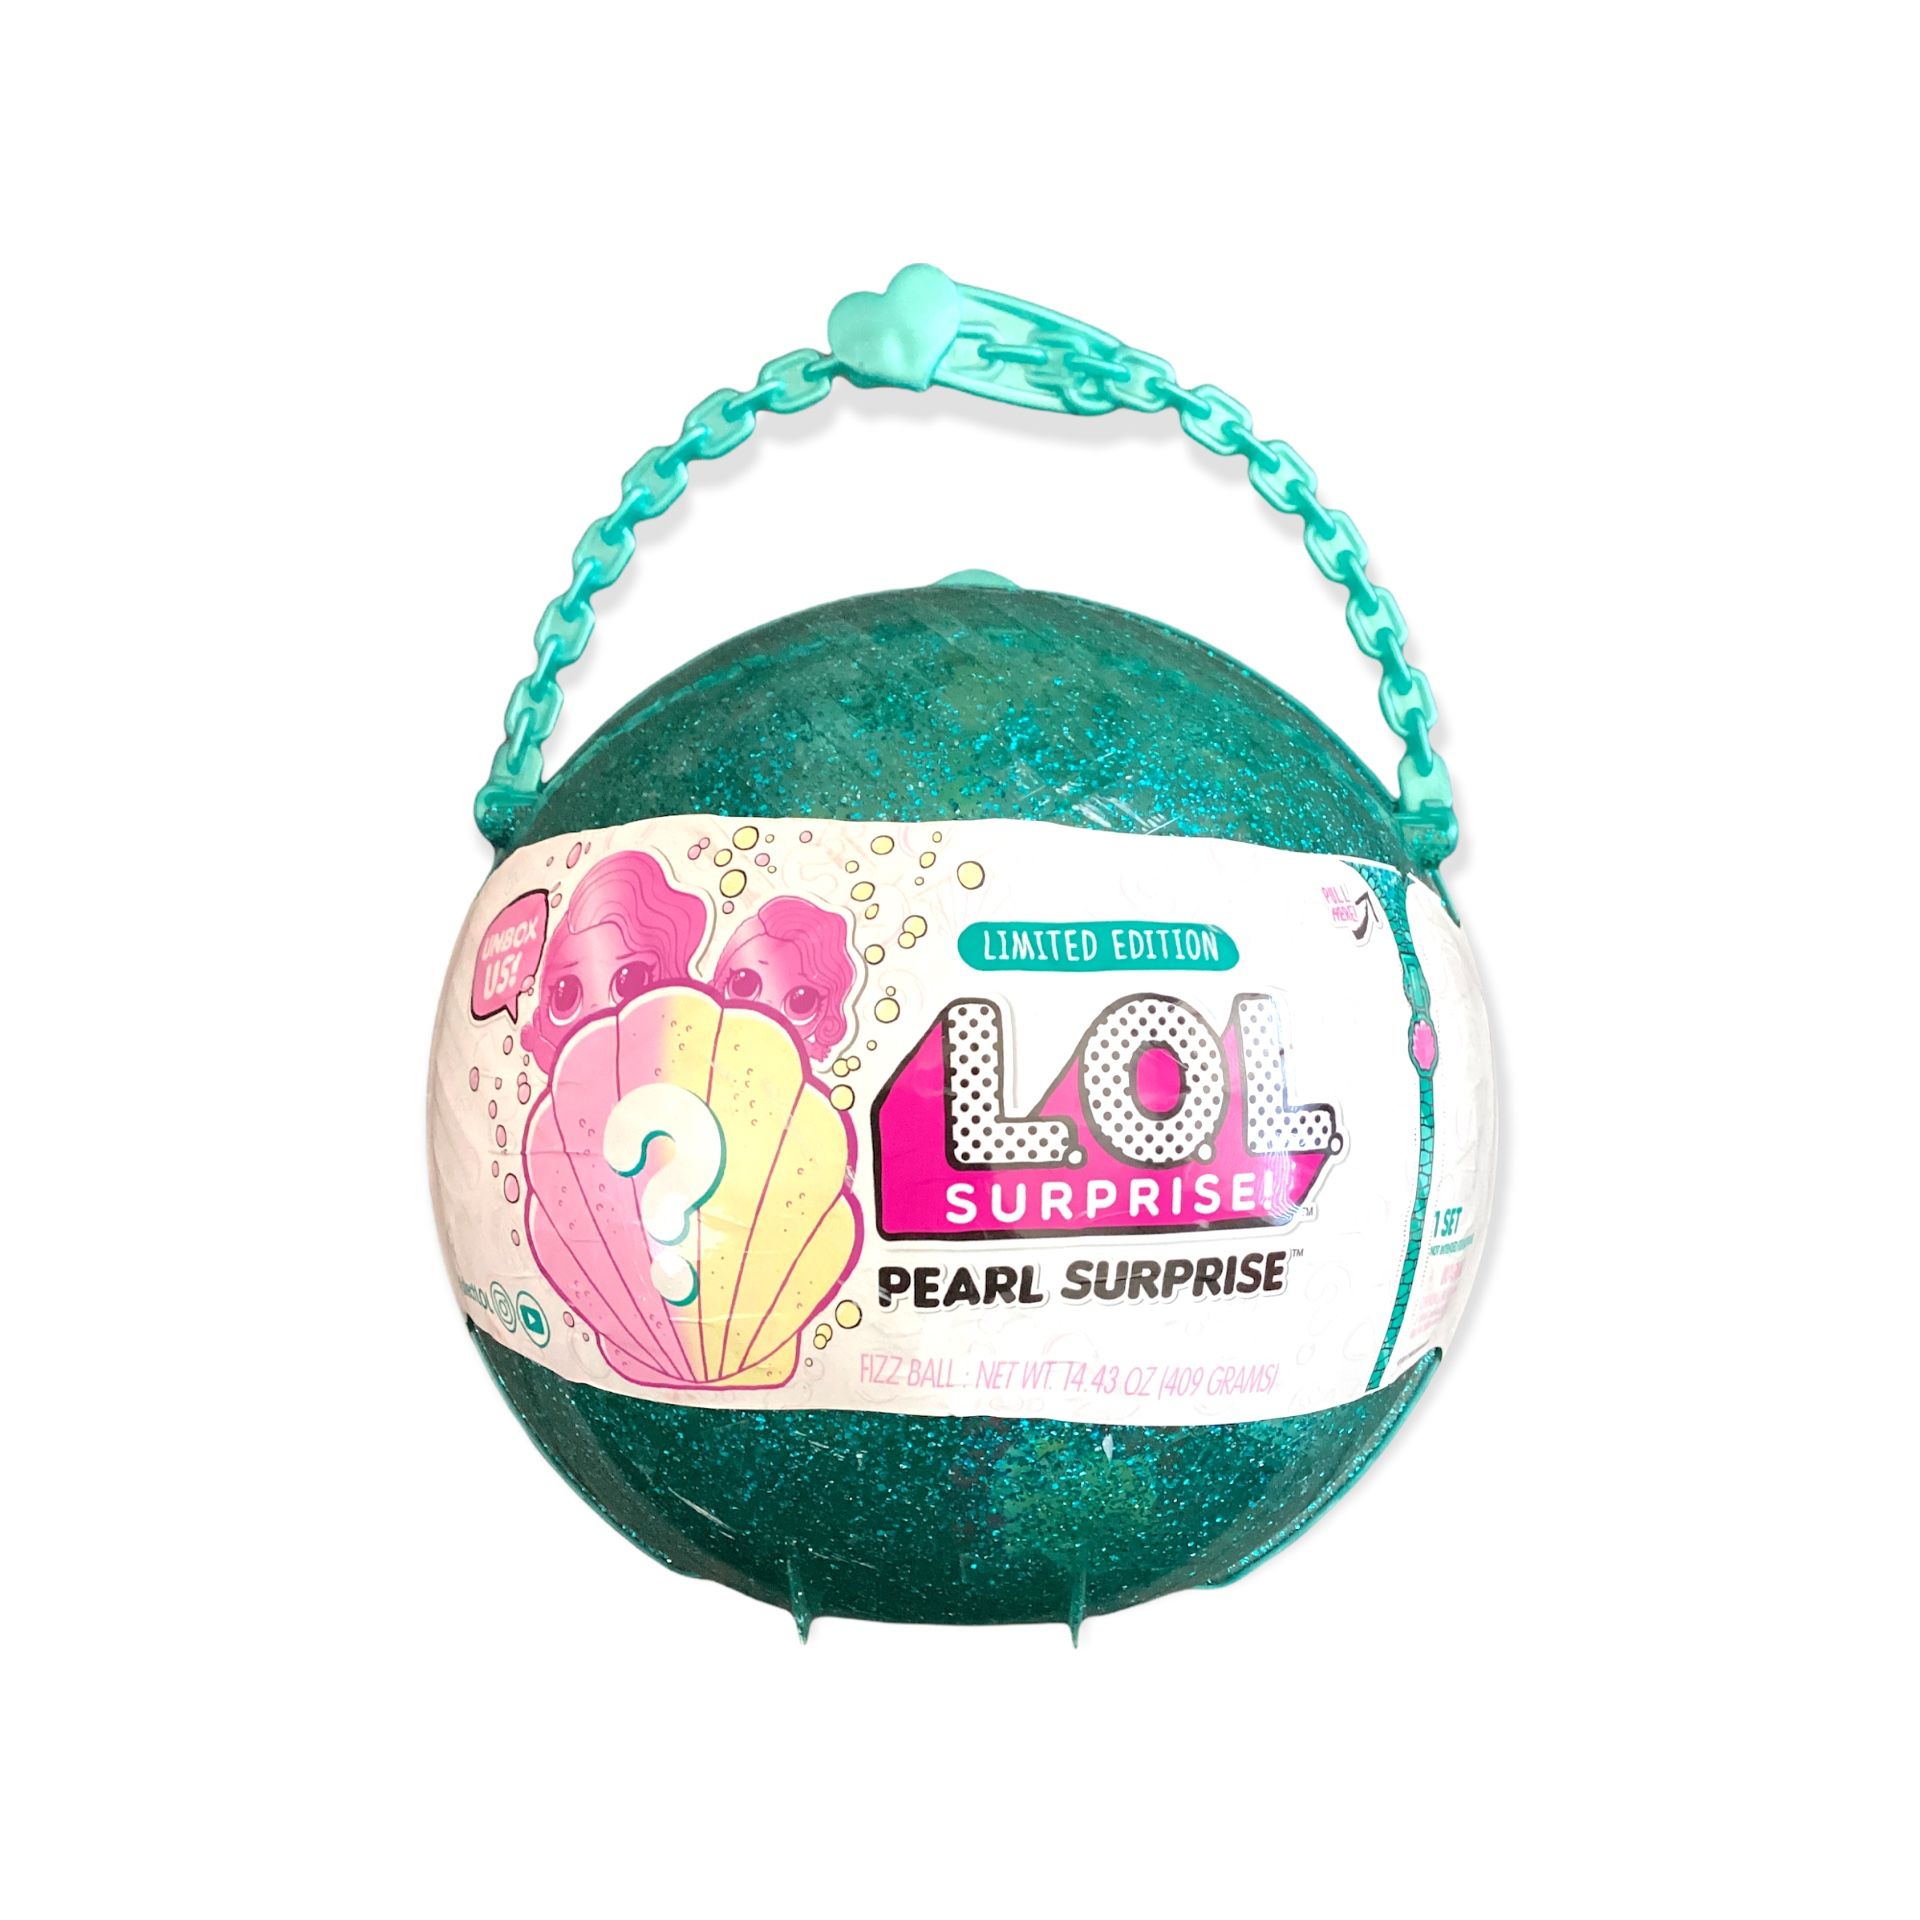 LOL Surprise! Teal Pearl Surprise - Limited Edition 